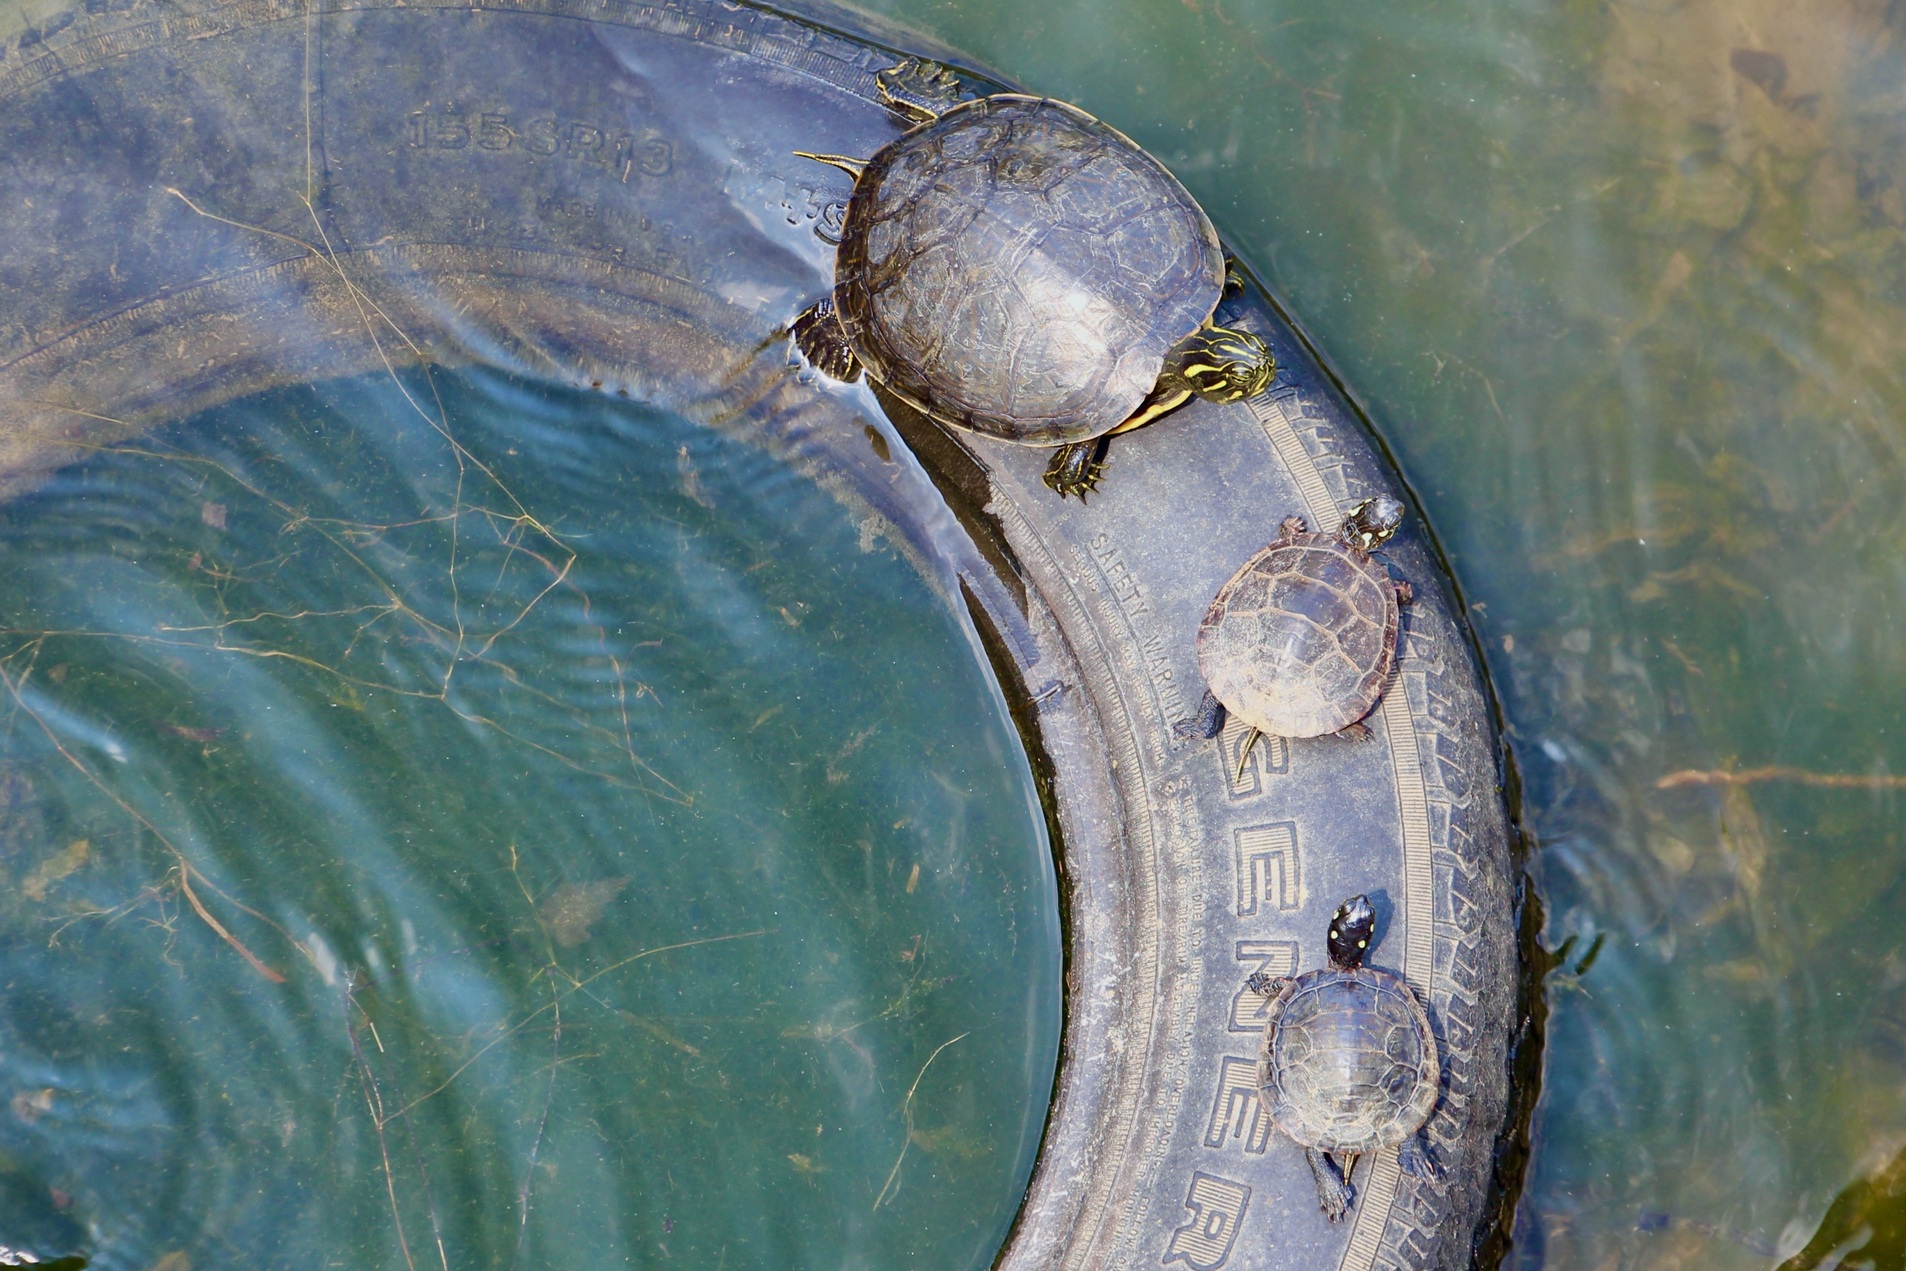 Three turtles rest on a tire in a lake in Virginia.